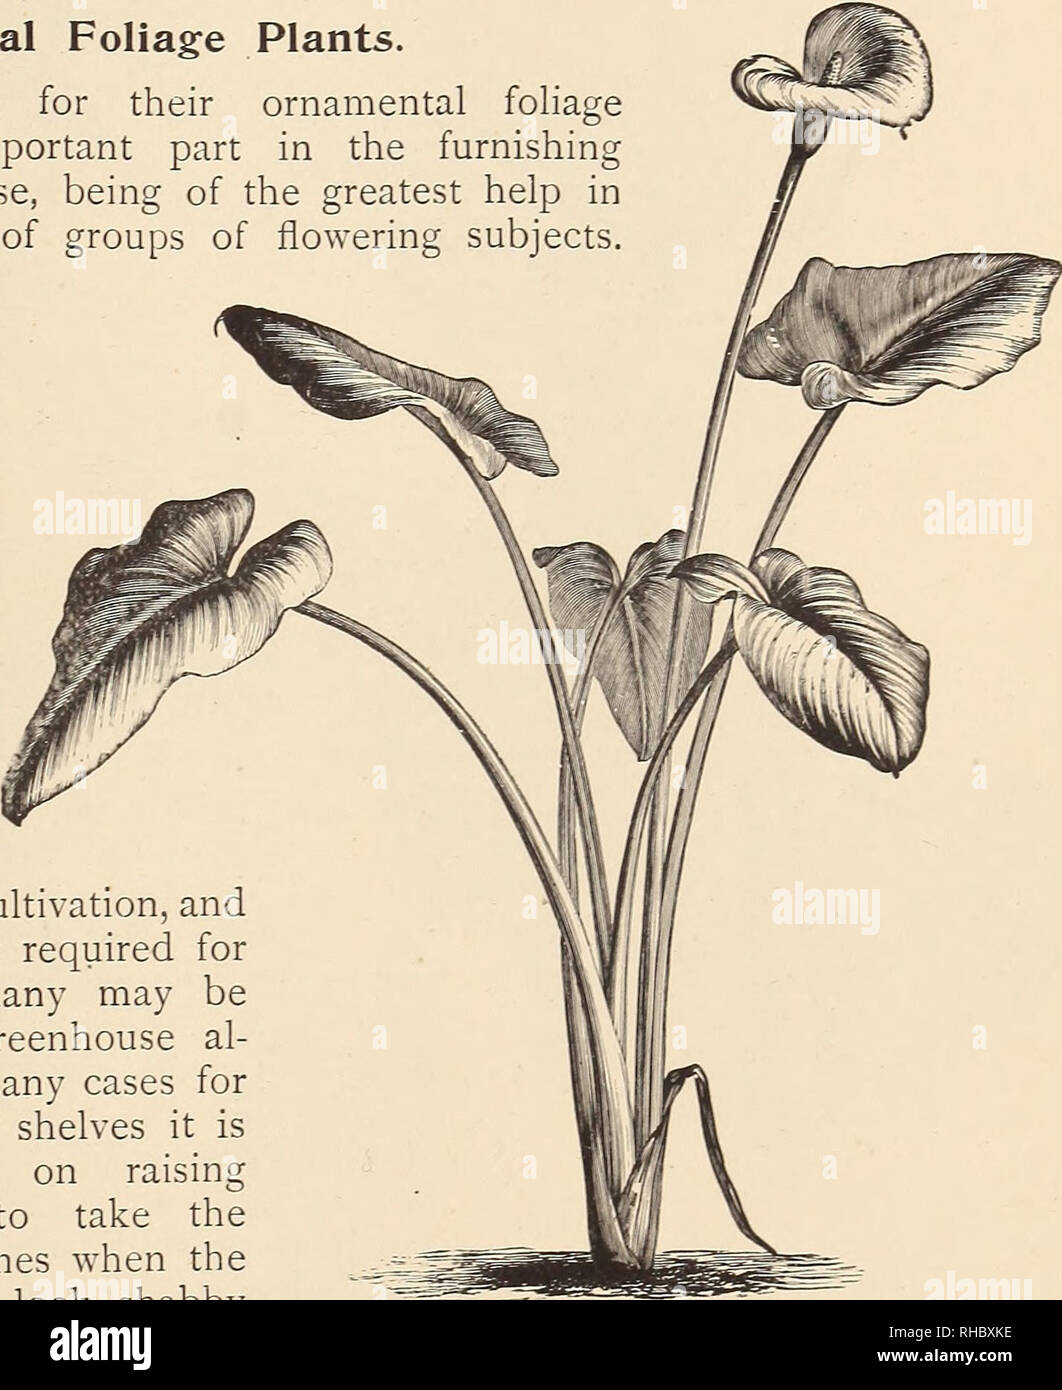 . The Book of gardening; a handbook of horticulture. Gardening; Floriculture. ox GREENHOUSE PLANTS. 747 Vallota purpurea (Scarborough Lily) somewhat resembles a Hippeastrum, and should receive similar treatment. Raise from offsets, and grow in sandy loam, peat, and leaf-soil. Keep dry in the cool pit in winter, grow warm in summer after flowering, and then partially dry off in early autumn. The flowers are scarlet. Veltheimia viridifolia is a useful bulb, flowering in spring. Propagate by offsets. At the time of potting in autumn grow in loam, leaf-soil, and sand, in a cool pit or in frames. R Stock Photo